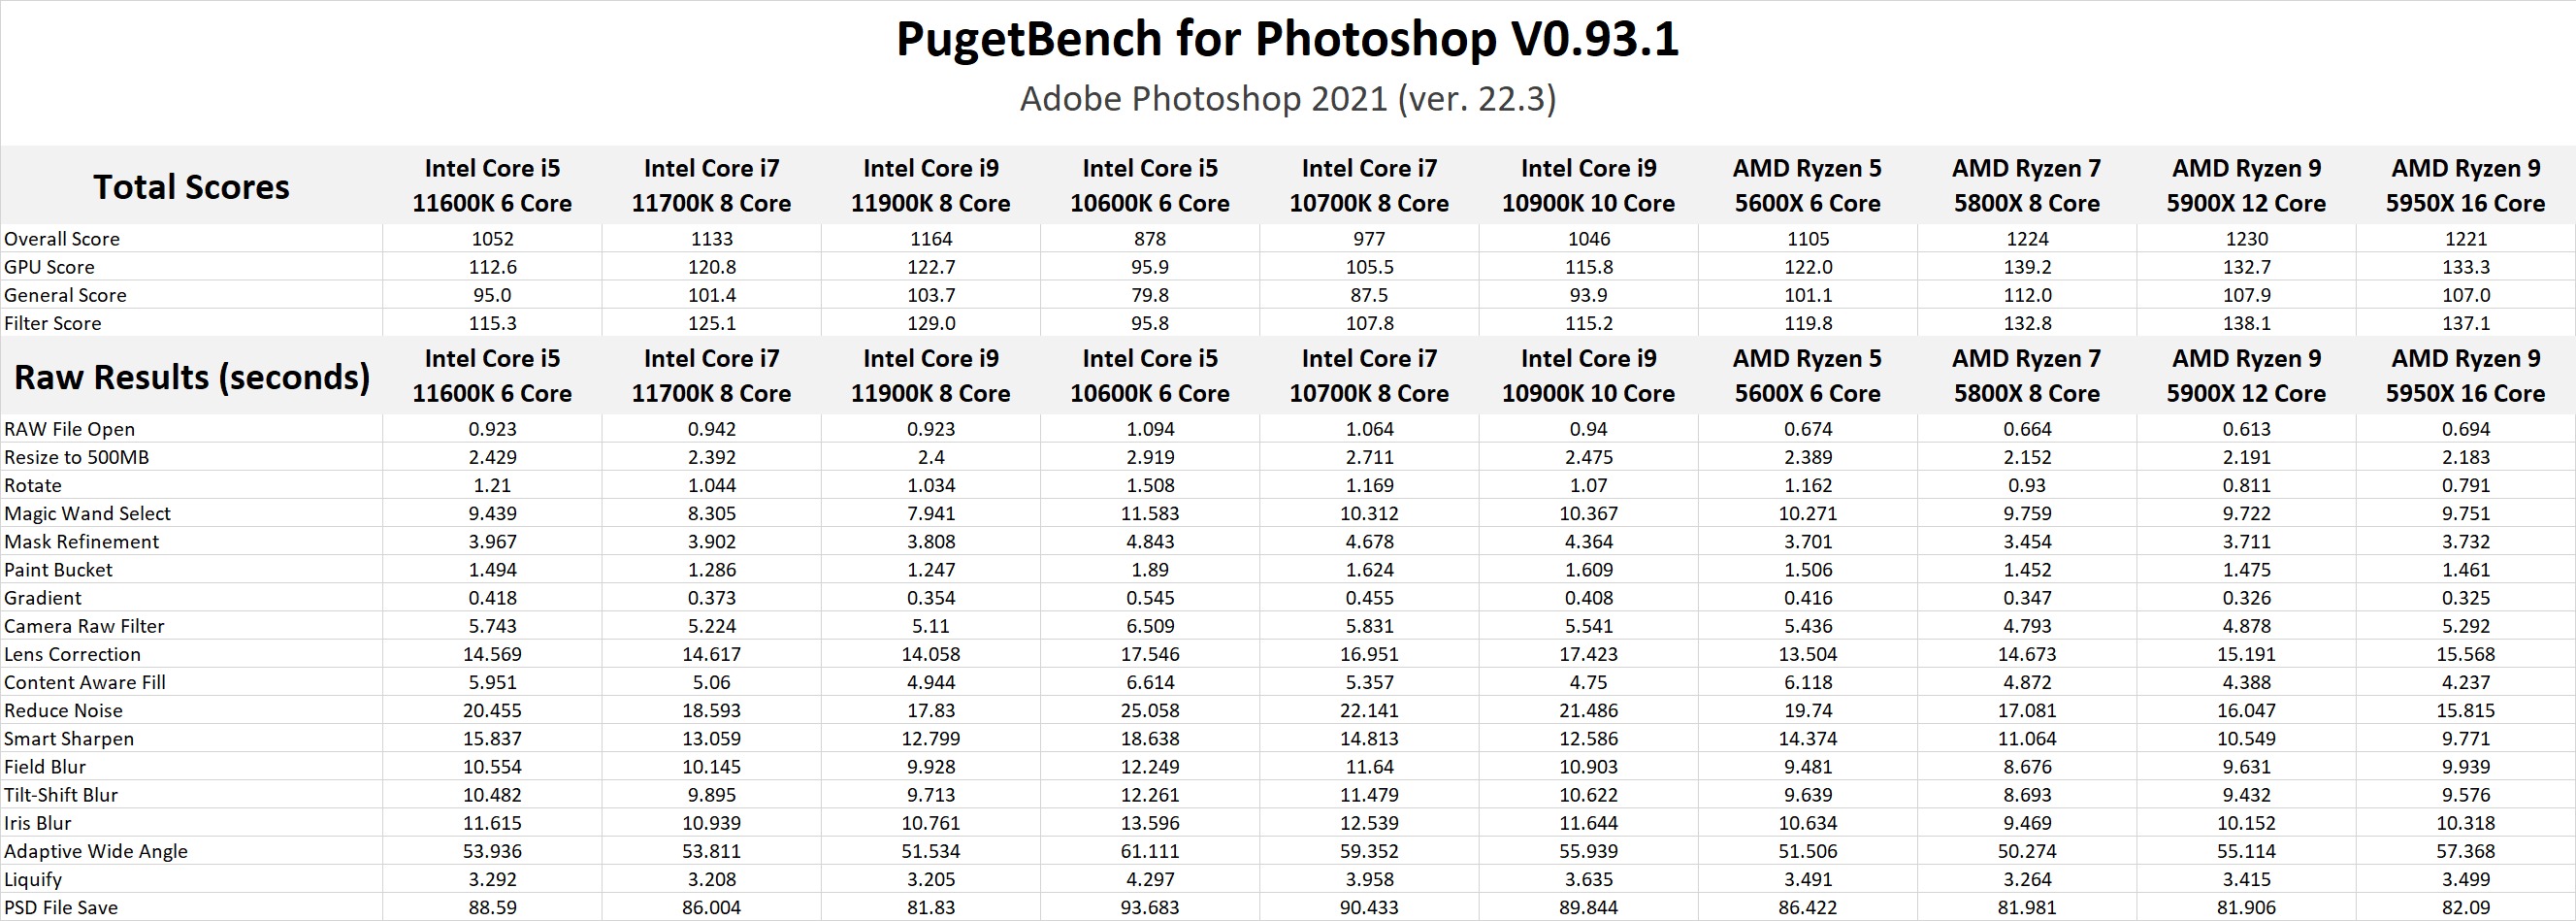 Photoshop 2021 benchmark results with 11th Gen Intel Core 11900K